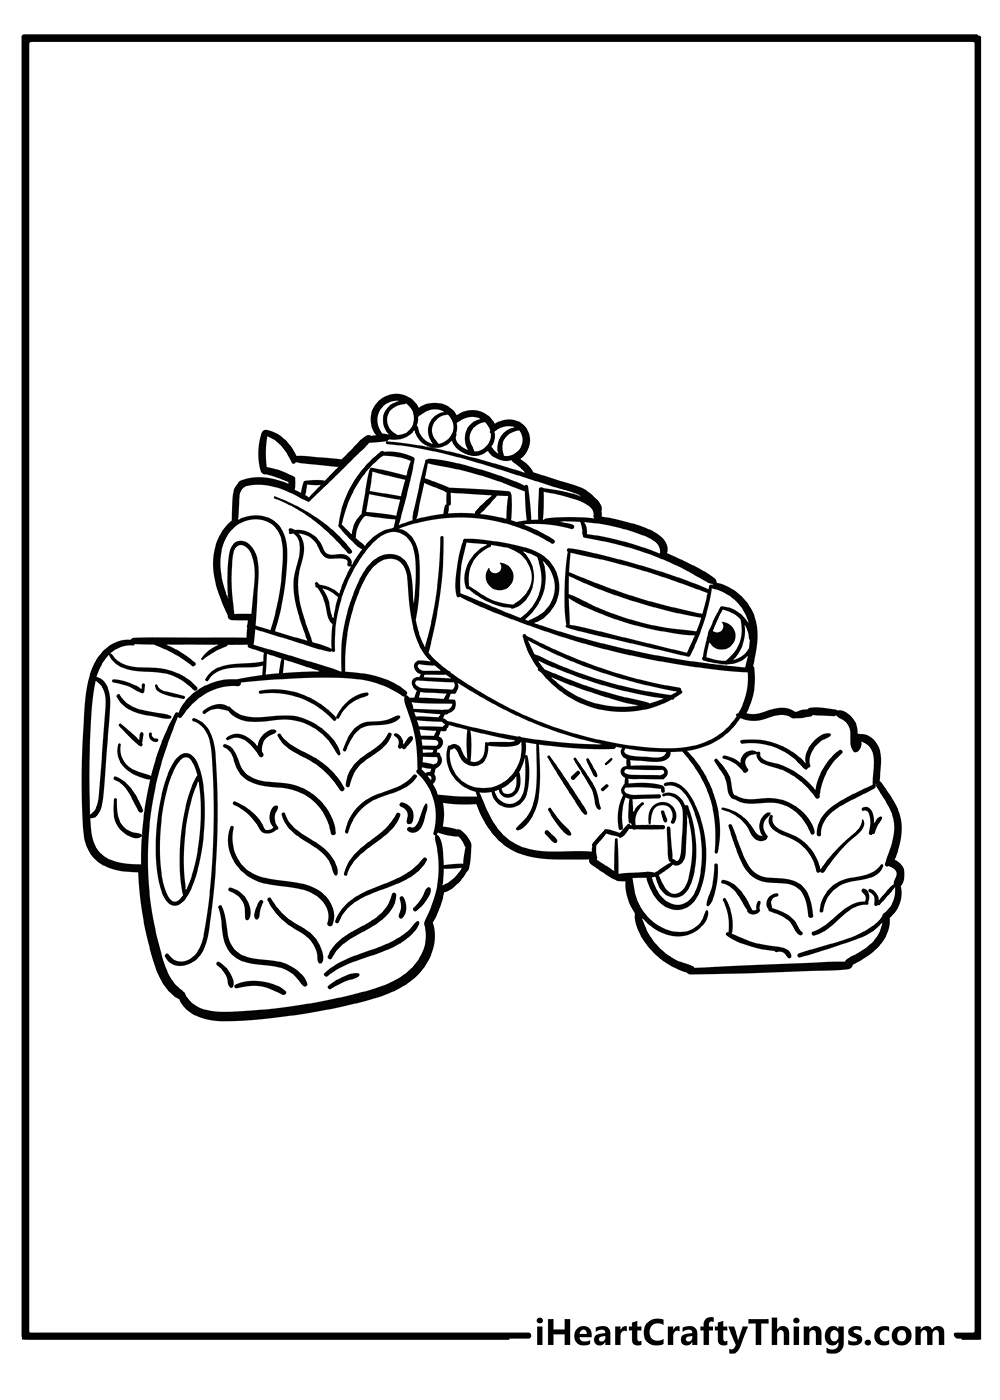 Blaze Coloring Pages free pdf download